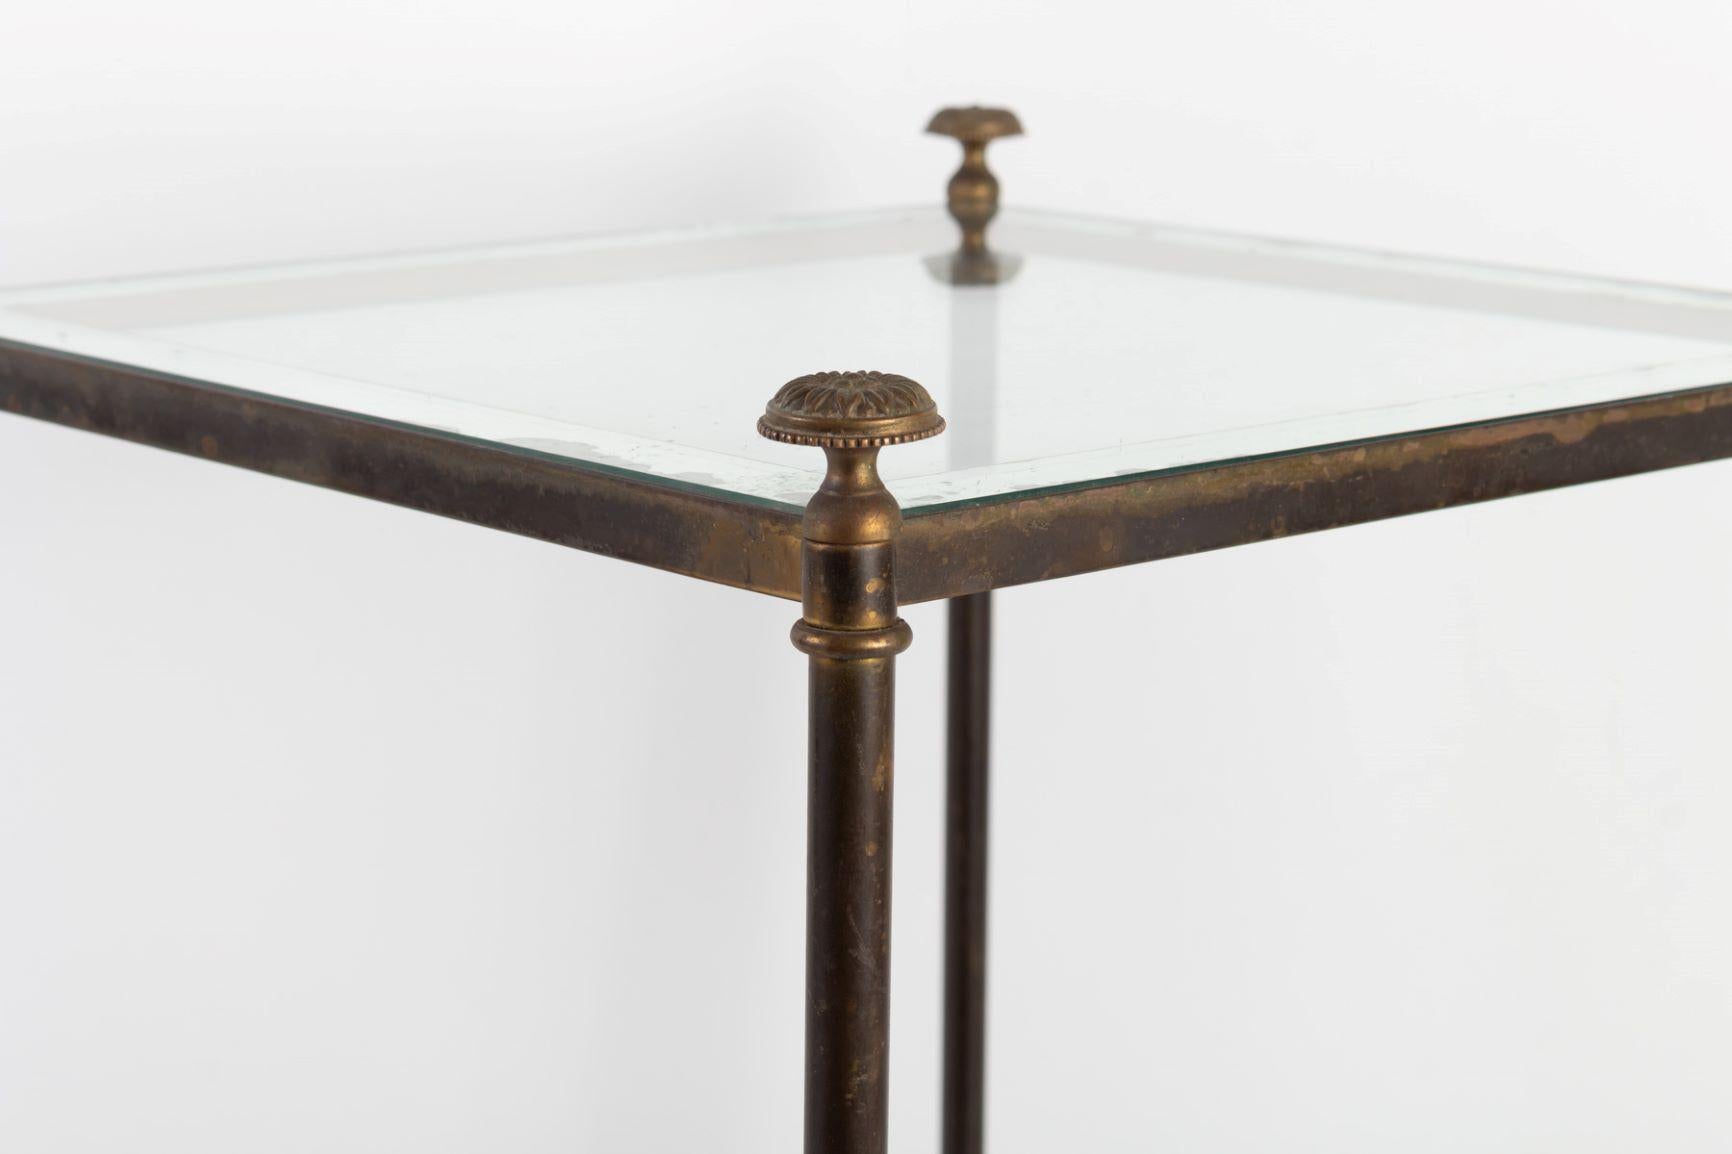 Elegant Pair of Small Square Side Tables Attributed to Maison Jansen 1940s-1950s For Sale 6